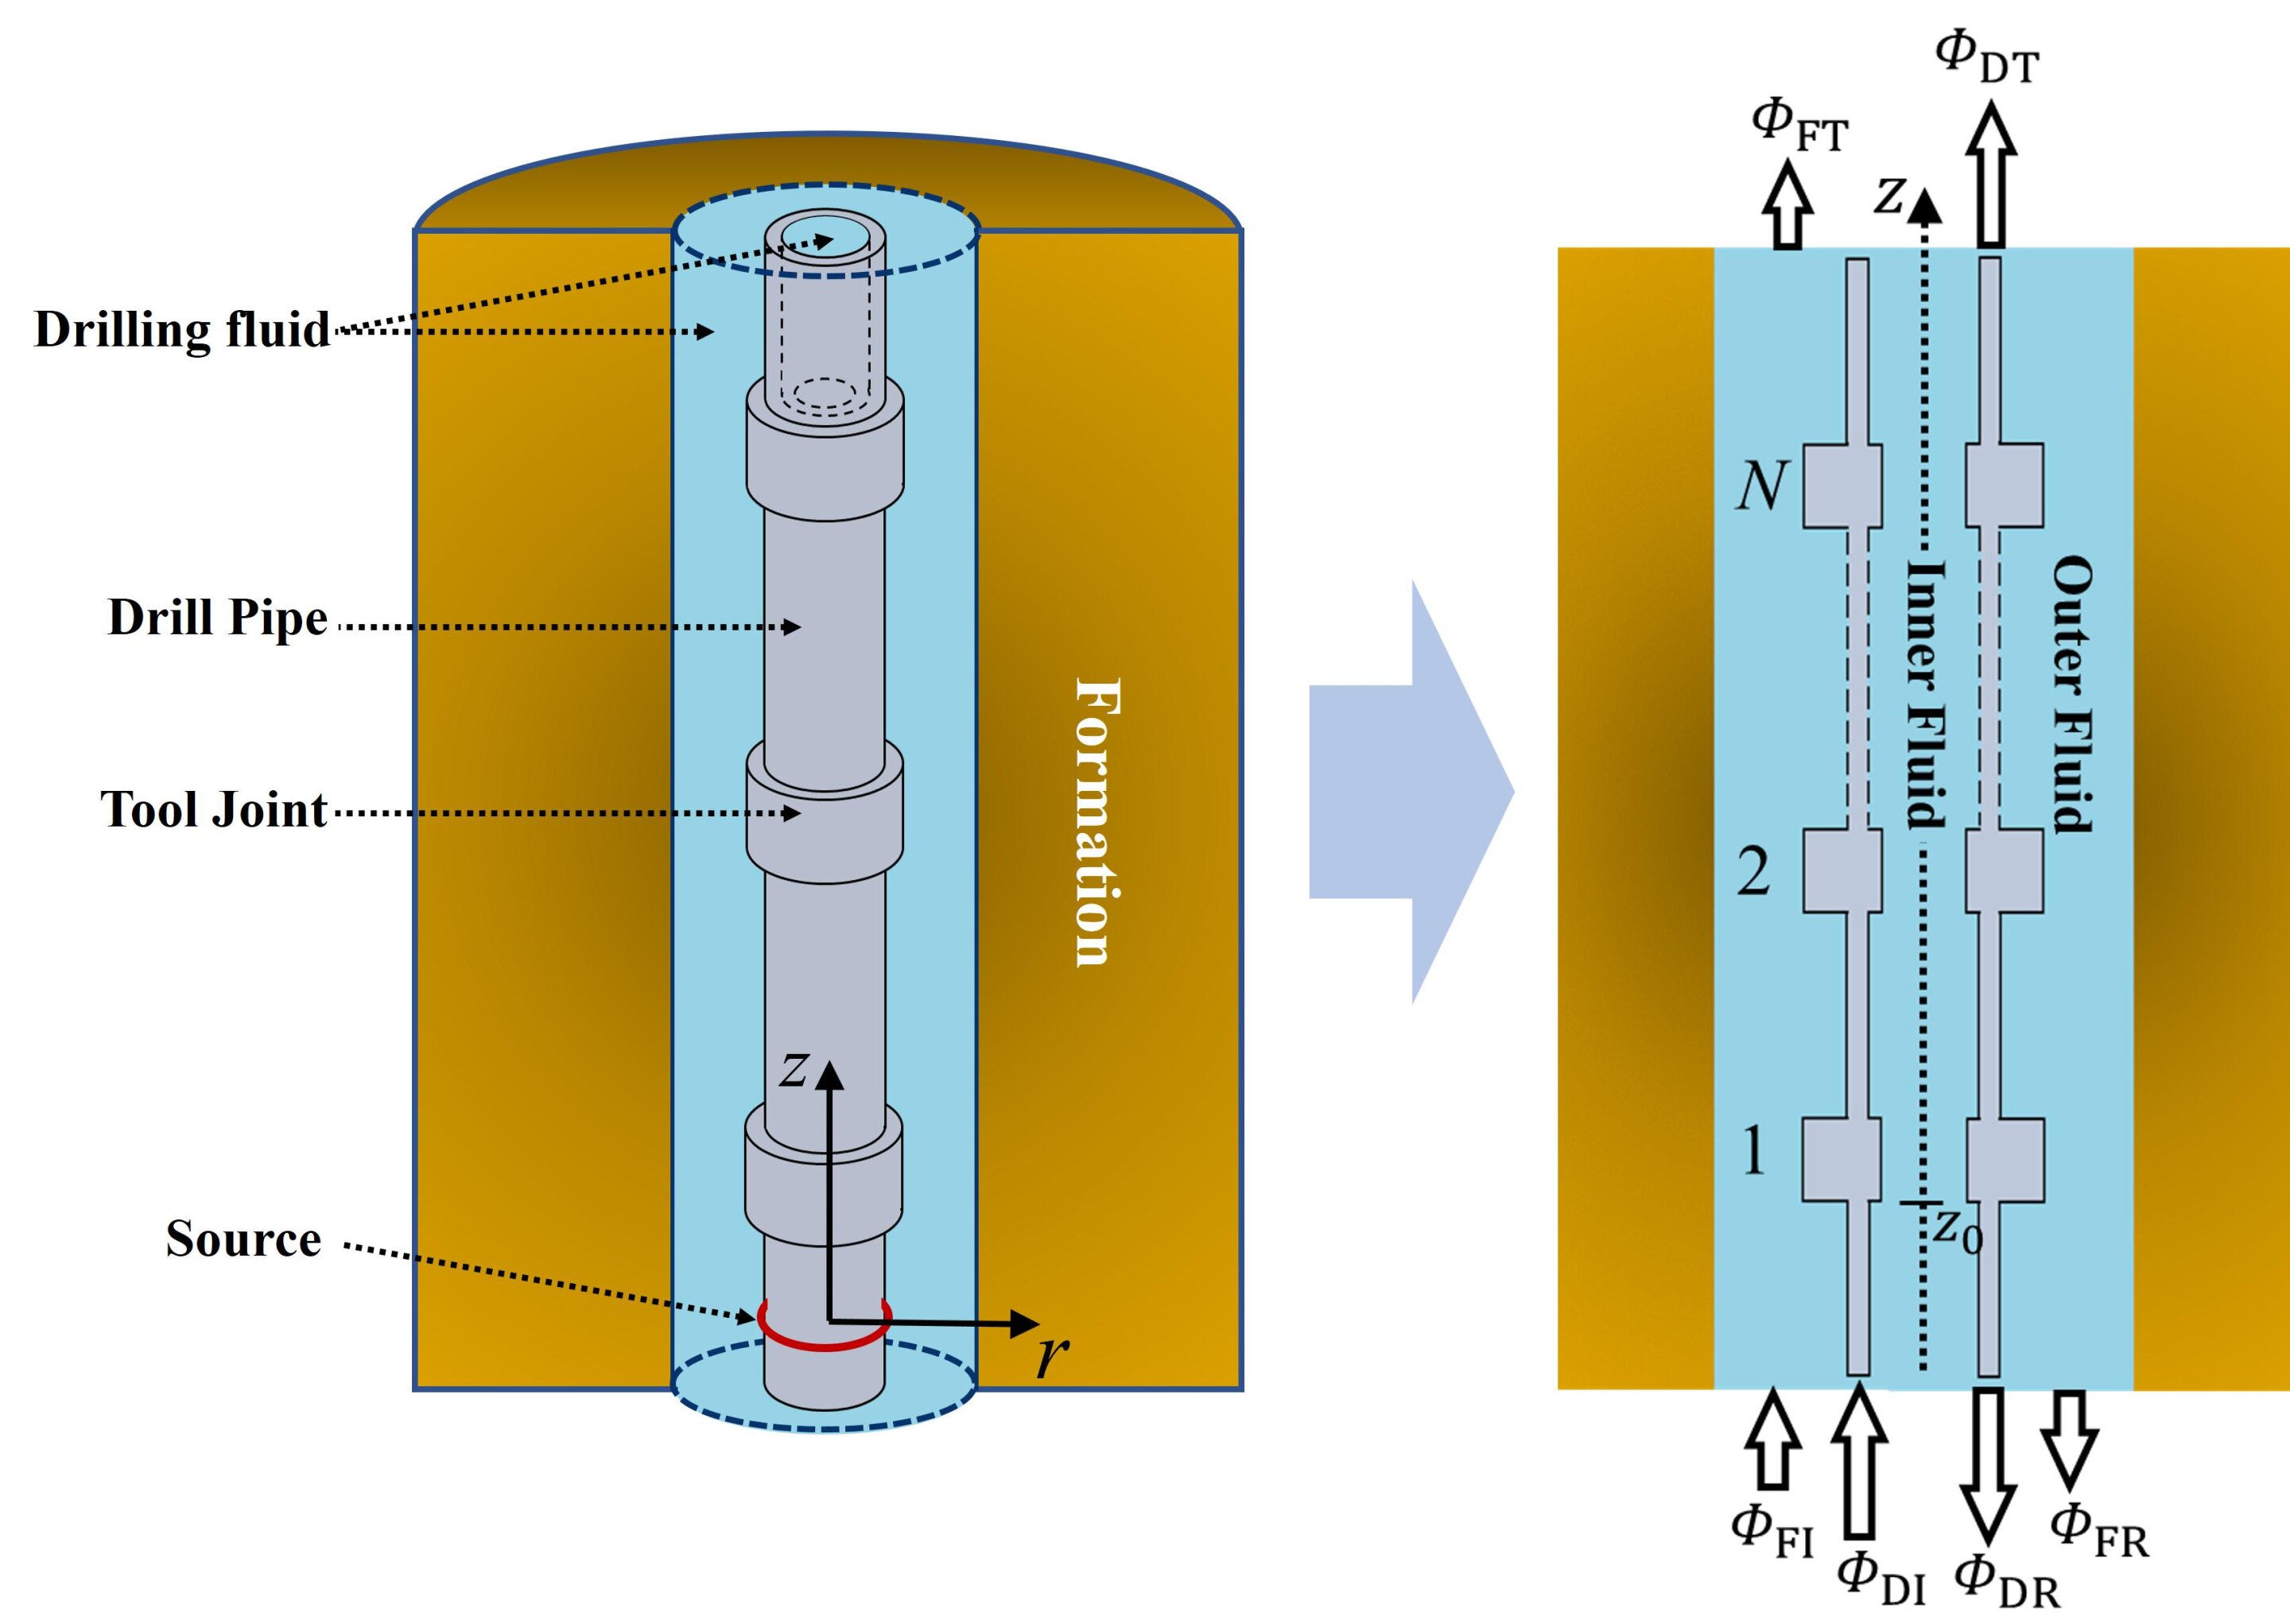 Researchers propose a modeling method of the drill-string acoustic channel for downhole telemetry